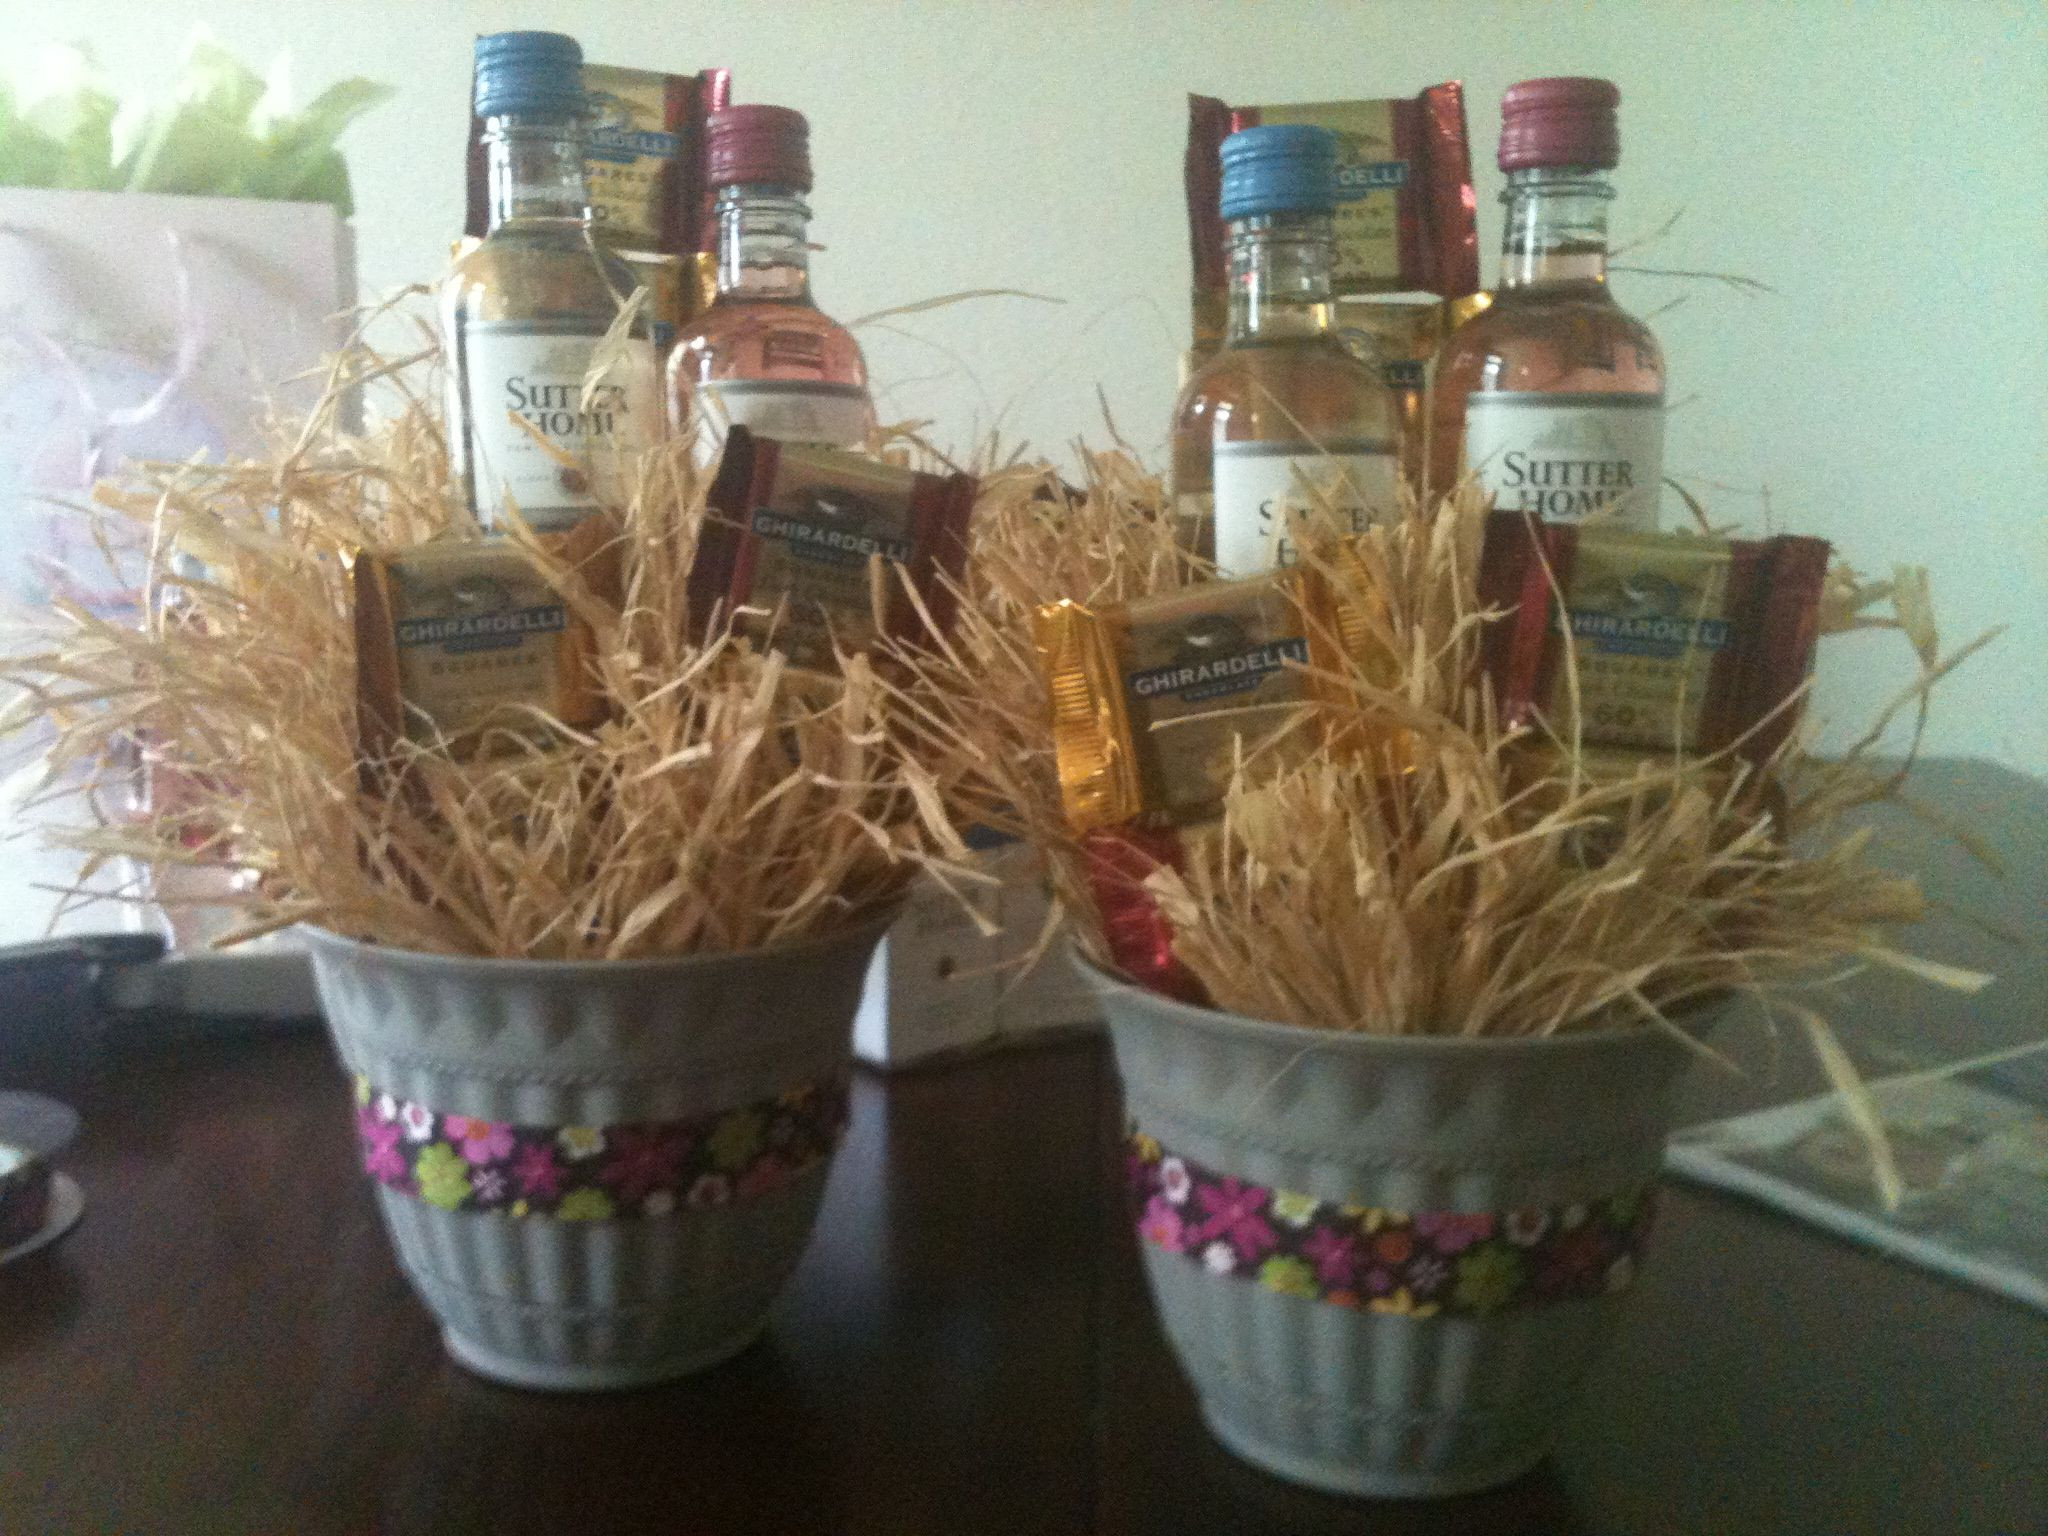 Bridal Shower Gift Basket Ideas For Bride
 Create small t baskets with wine & chocolate for your